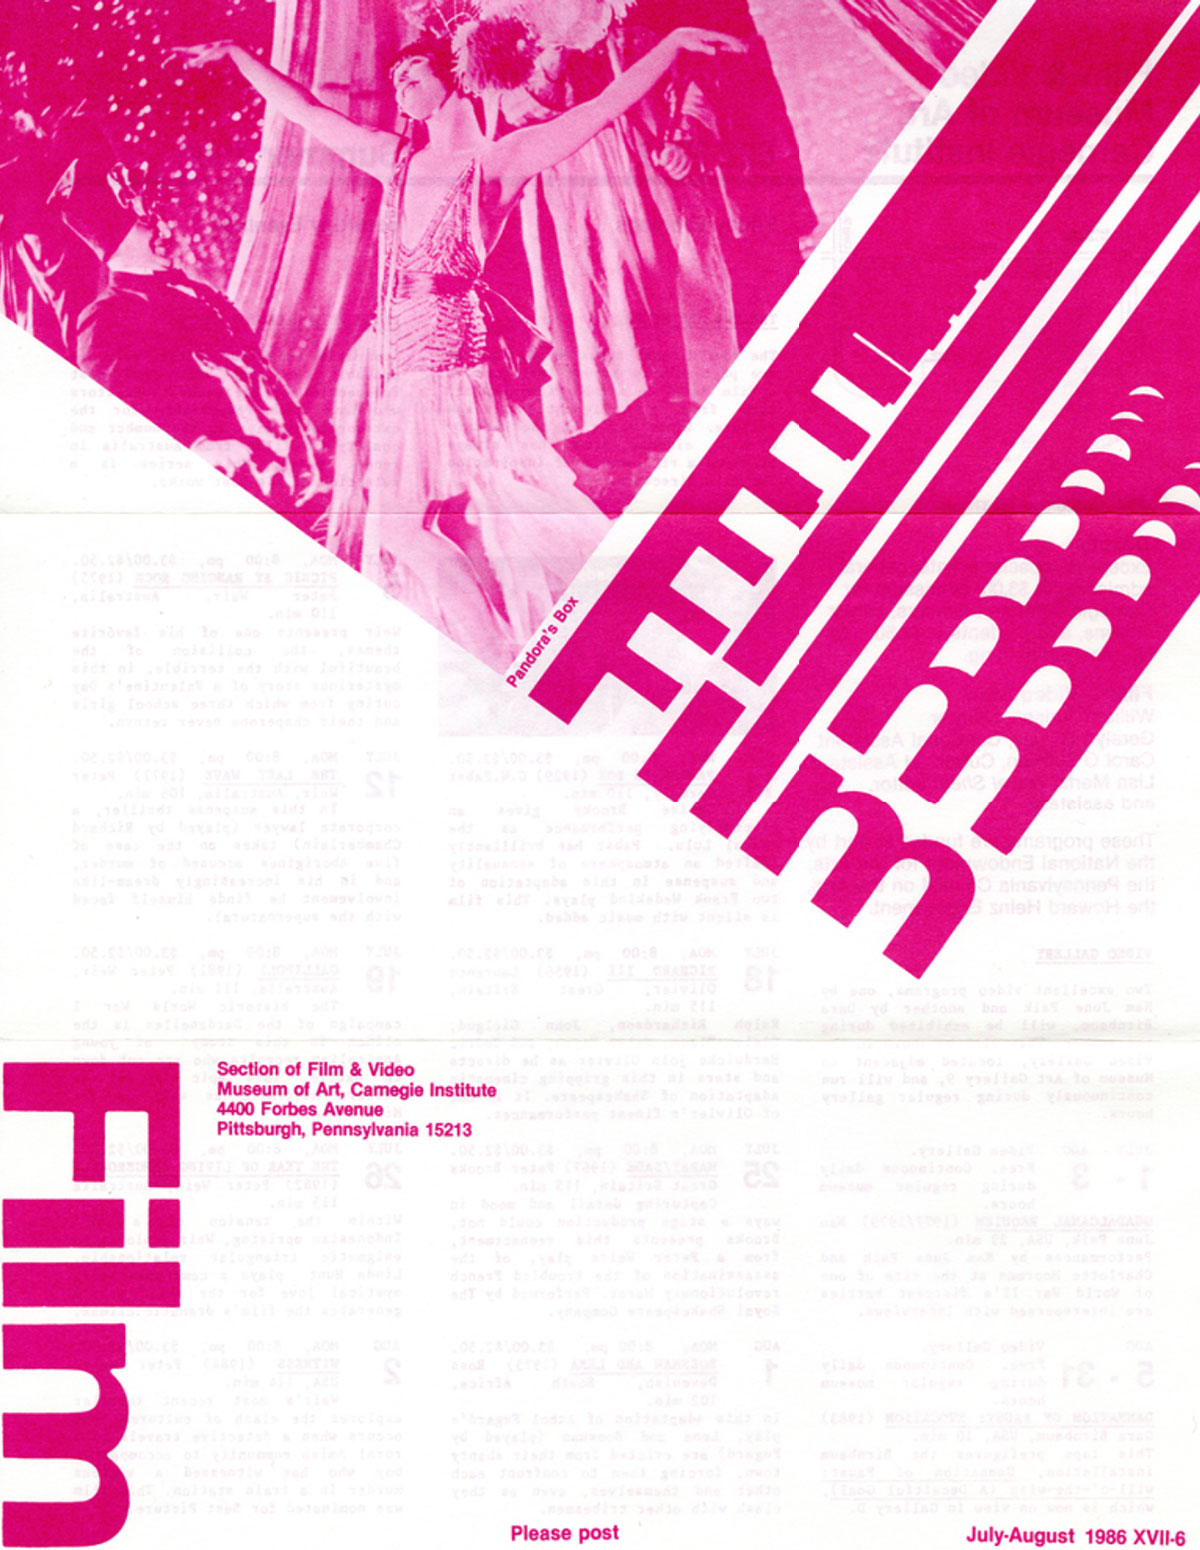 A brightly colored poster with a photo of a woman in a beaded, belted costume with her arms outstretched at the top next to the word “film” repeated and layered on itself.